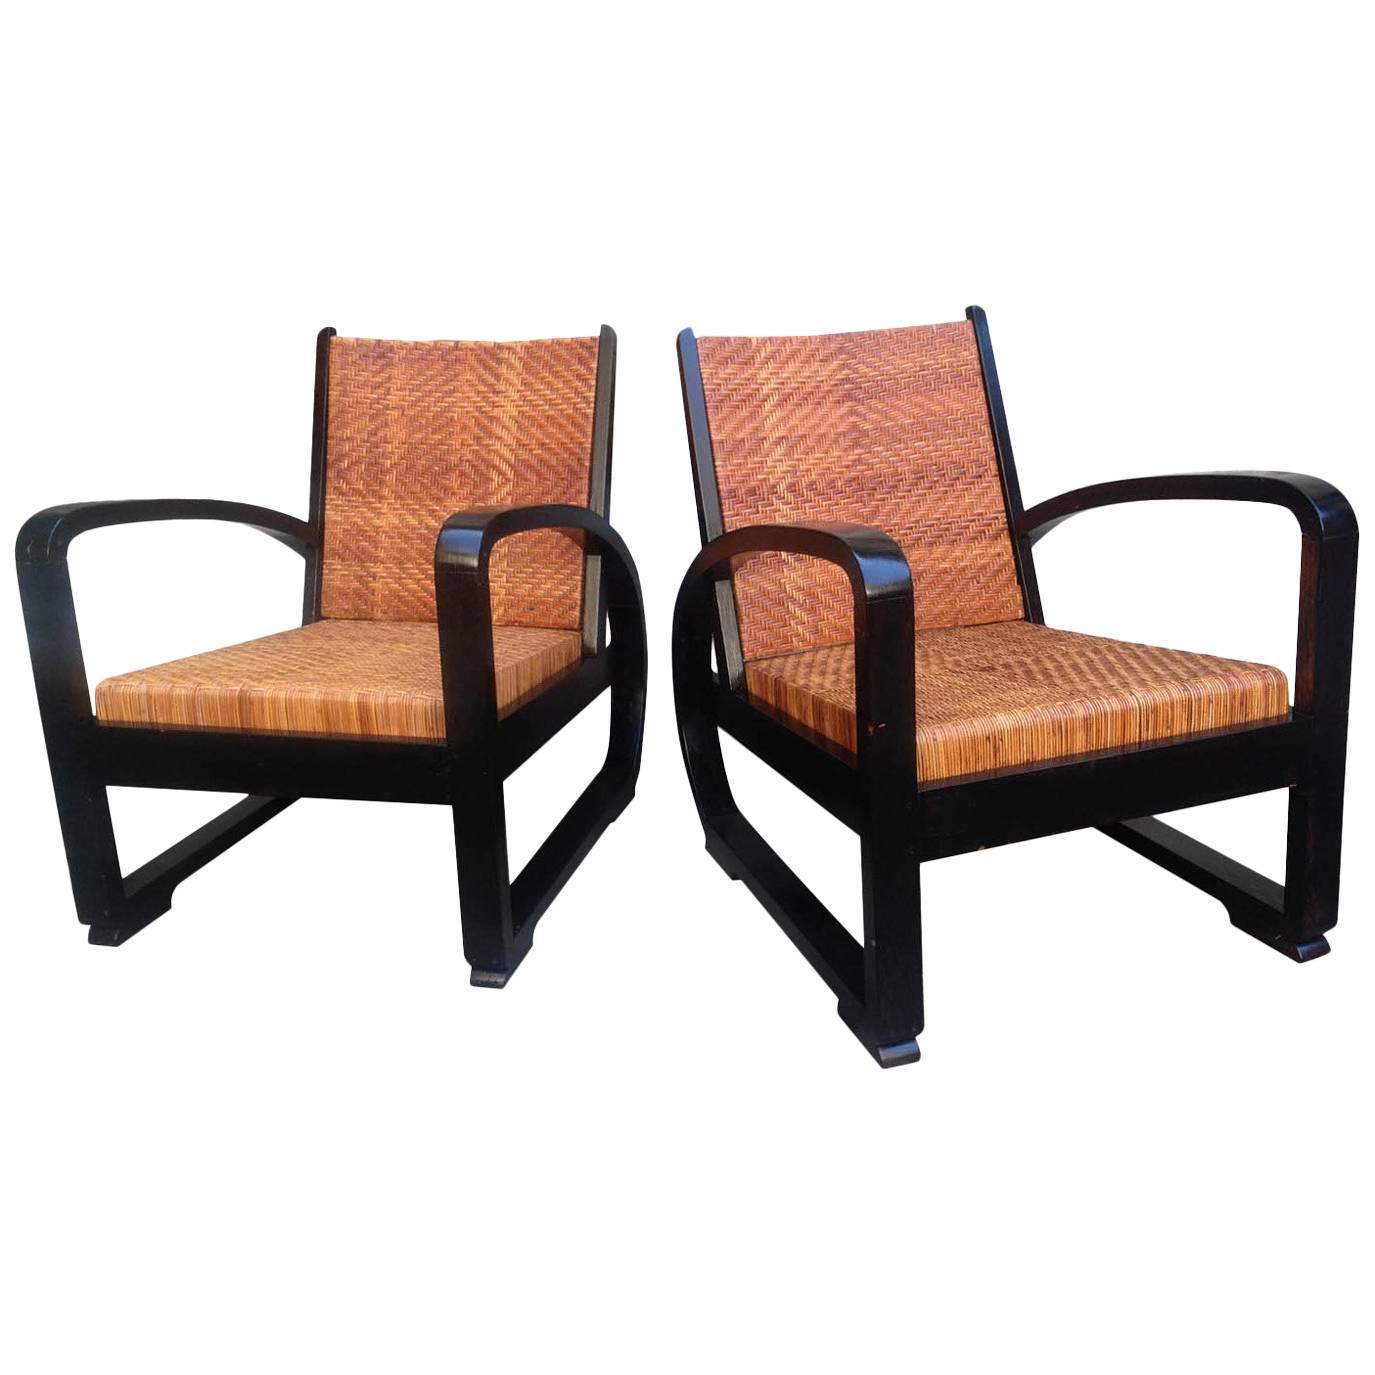 Mid-20th Century Set of Two Modernist Rattan Lounge Chairs For Sale